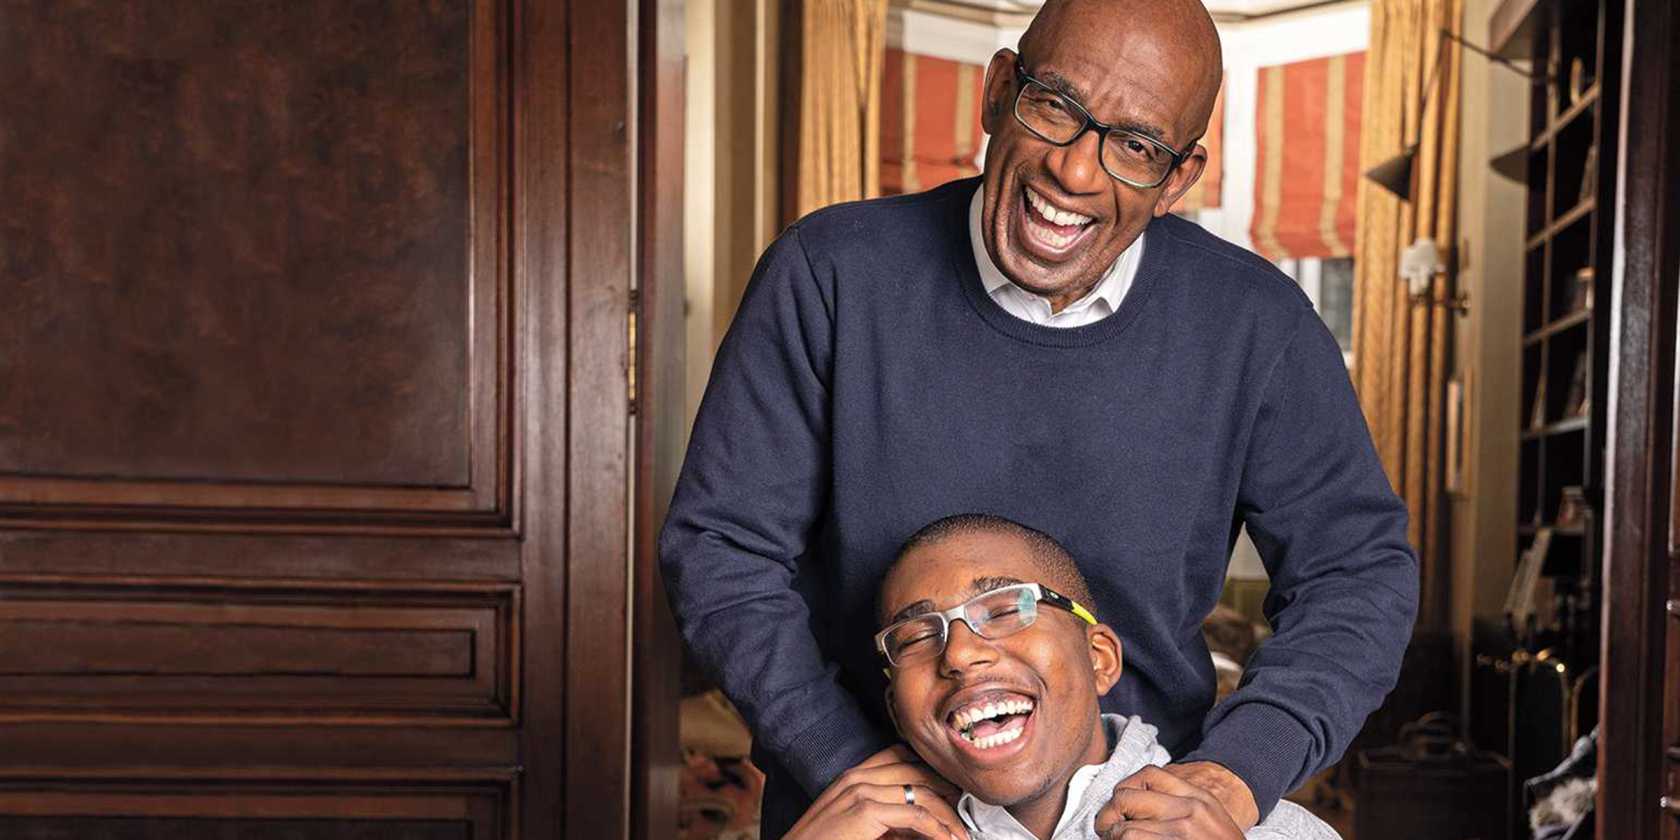 Latest AL Roker Deborah Roberts Son Update - Here’s What You Should Know